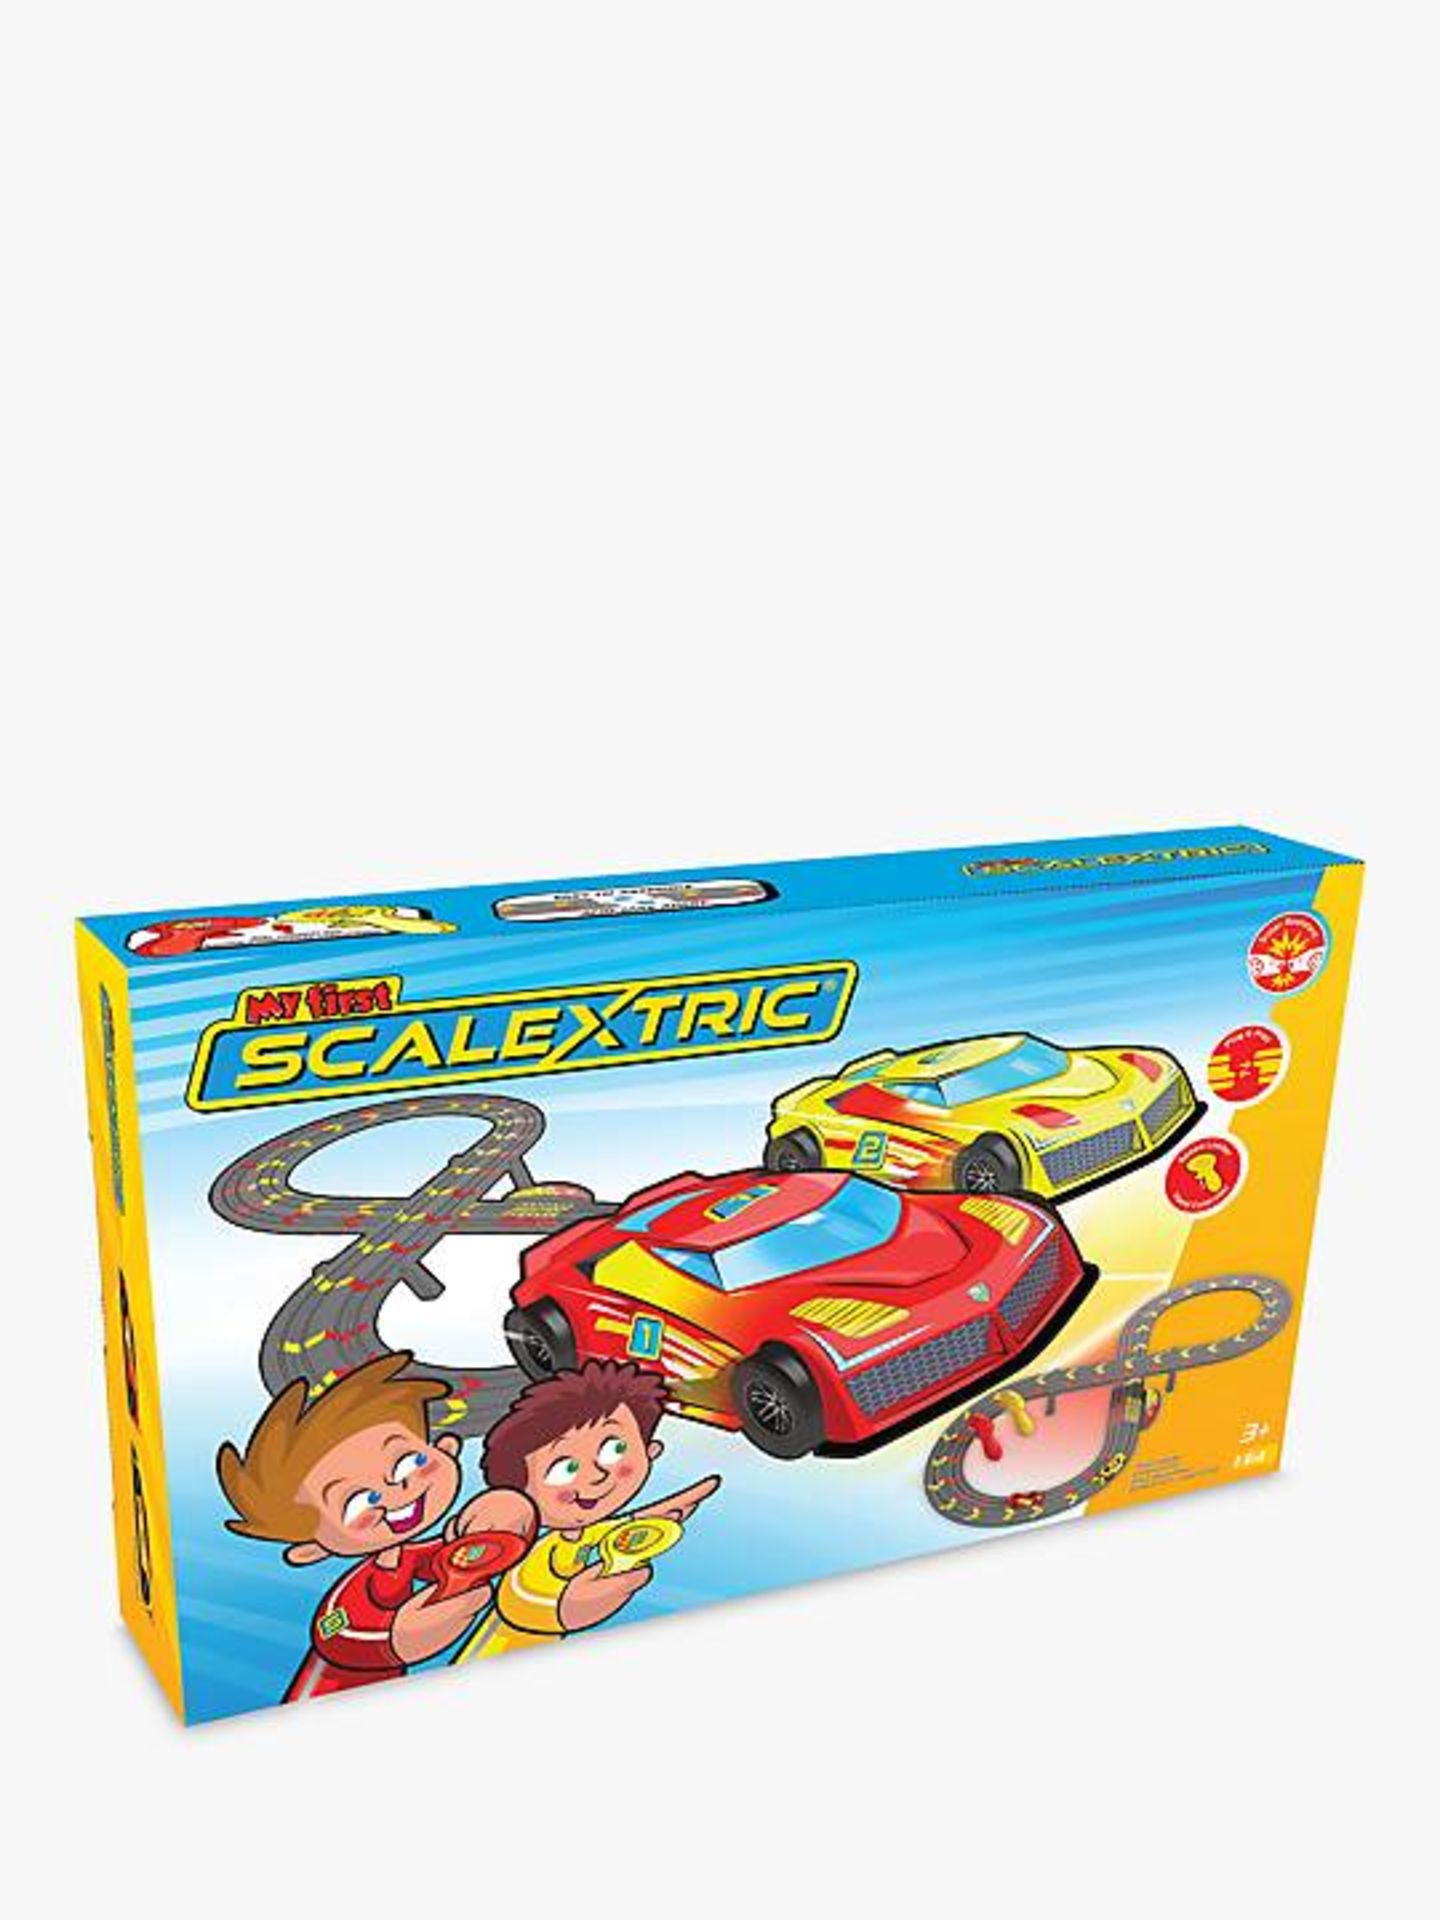 Pallet of Raw Customer Returns - Category - TOYS - P100177933 - Image 31 of 42